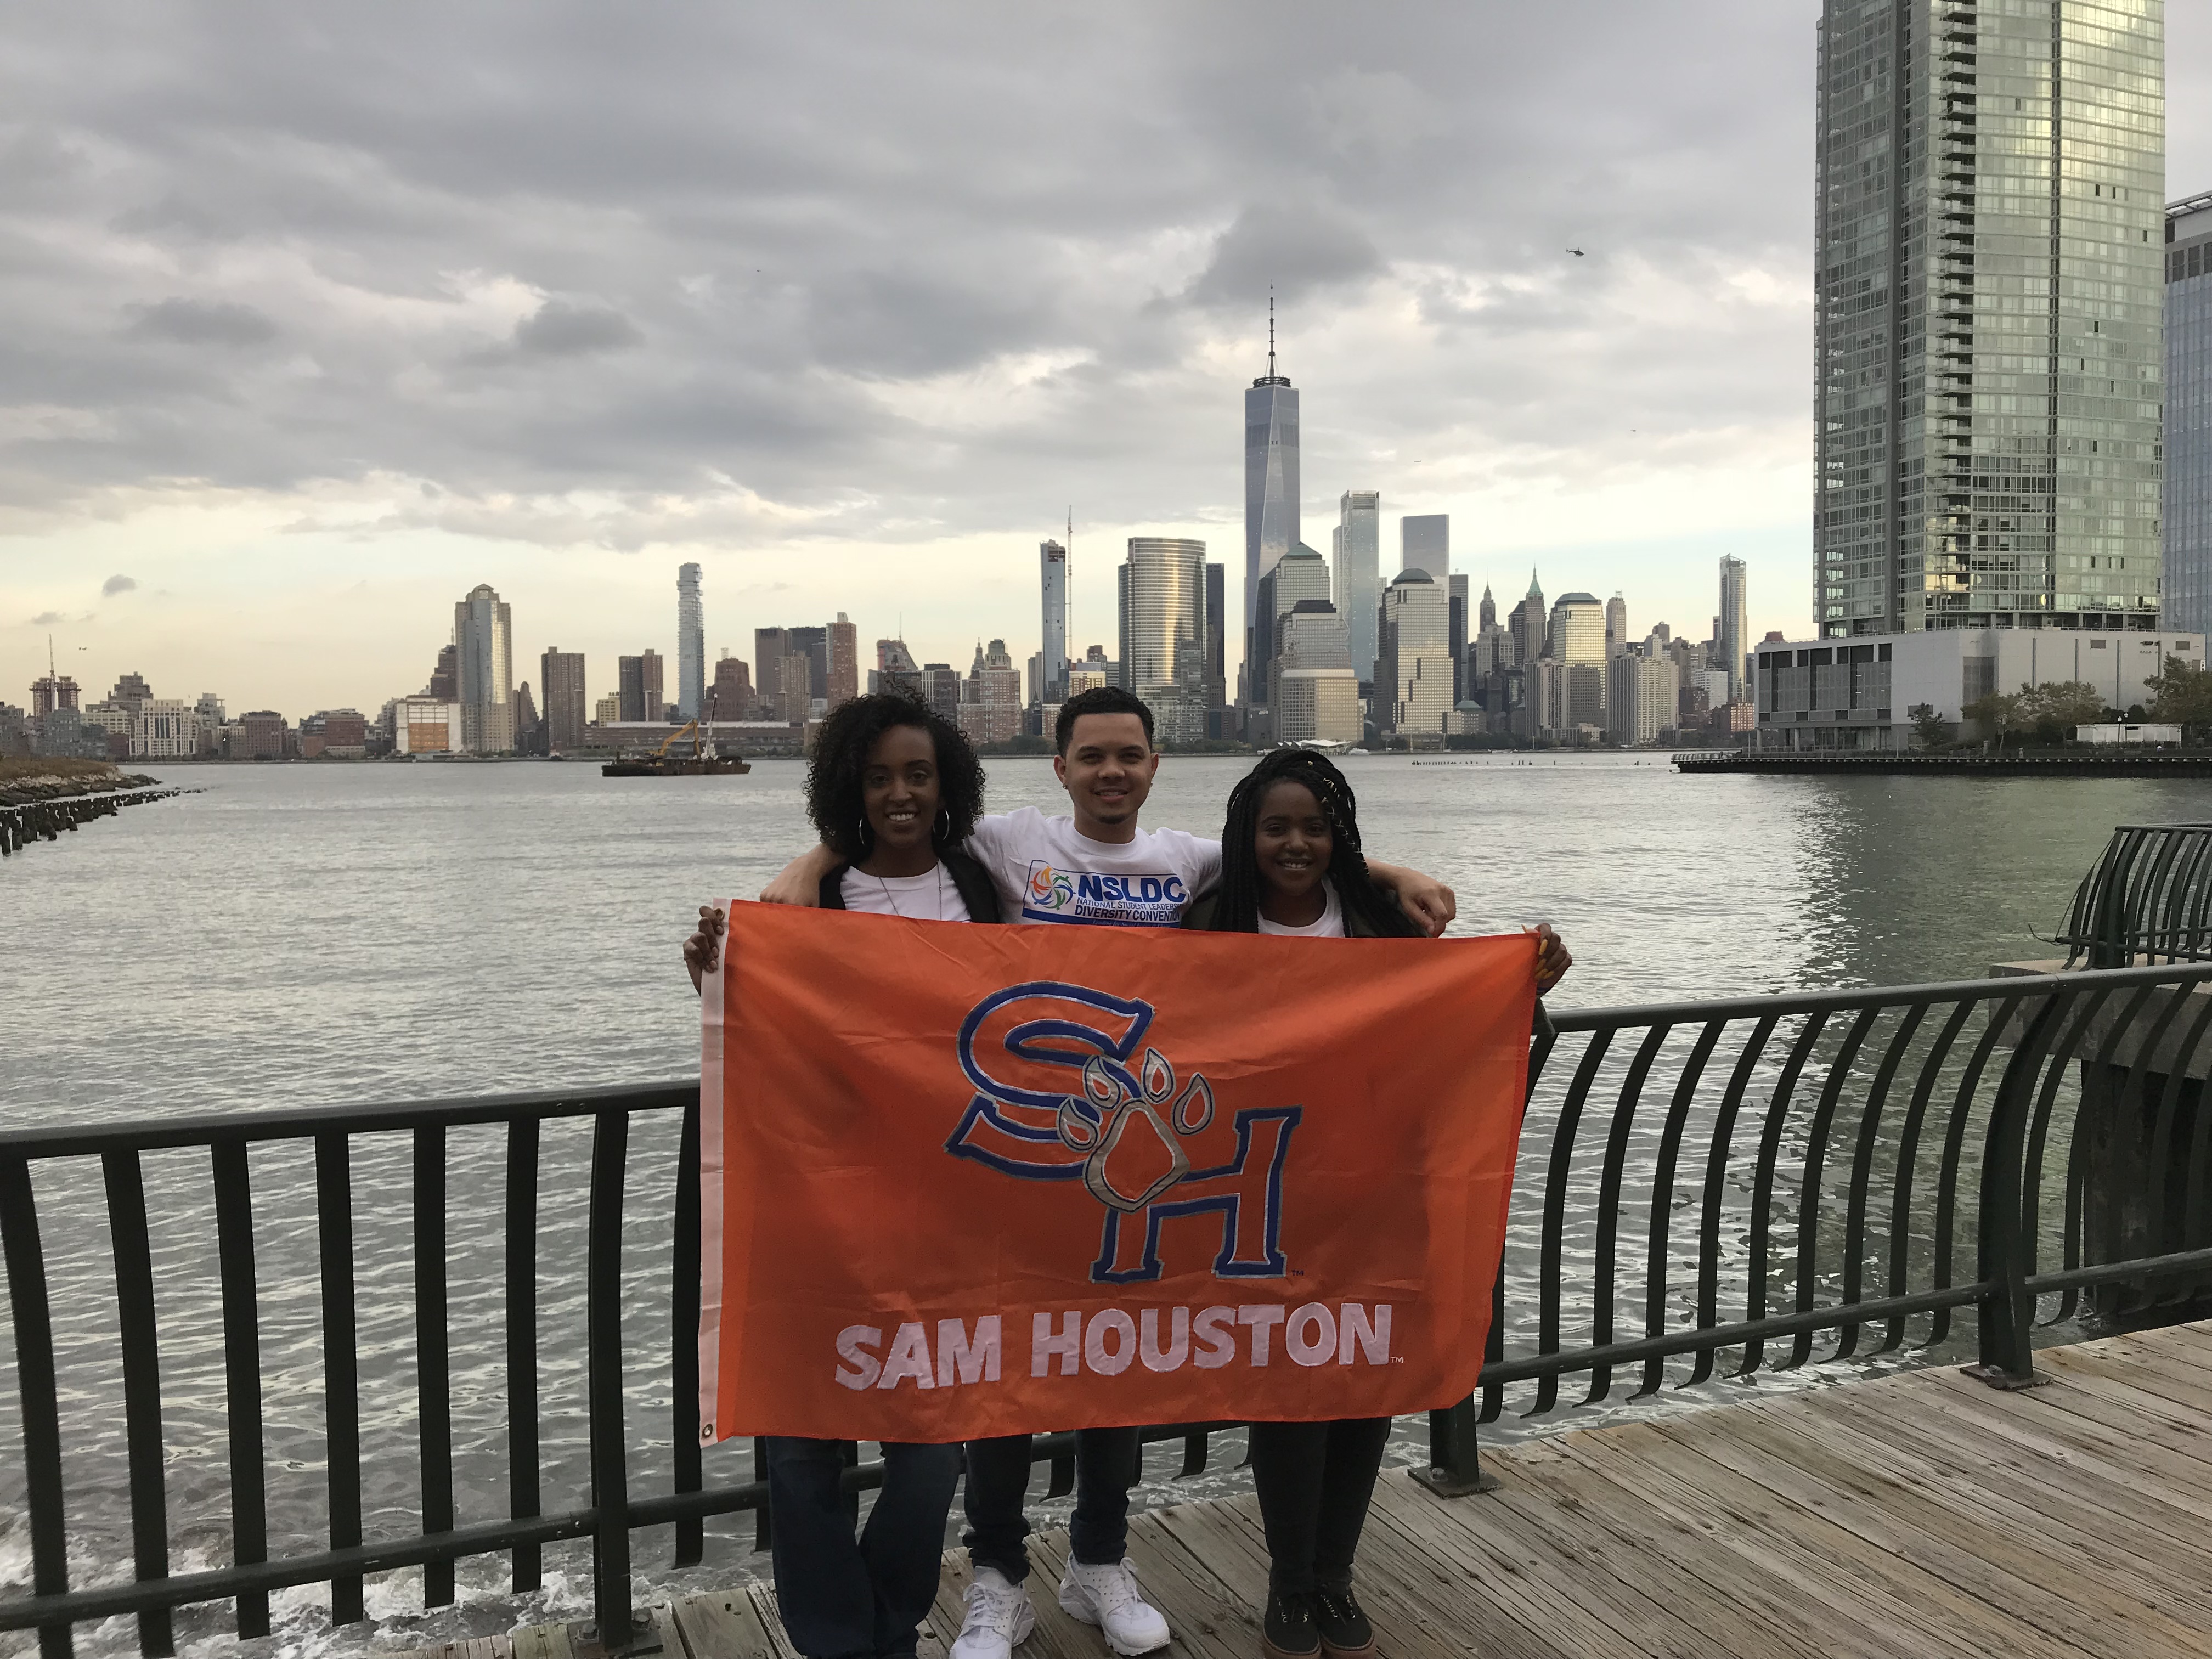 Students pose on a bridge holding a SHSU flag. There is a large body of water behind them and the One World Trade center in New York City is in the skyline in the distance.